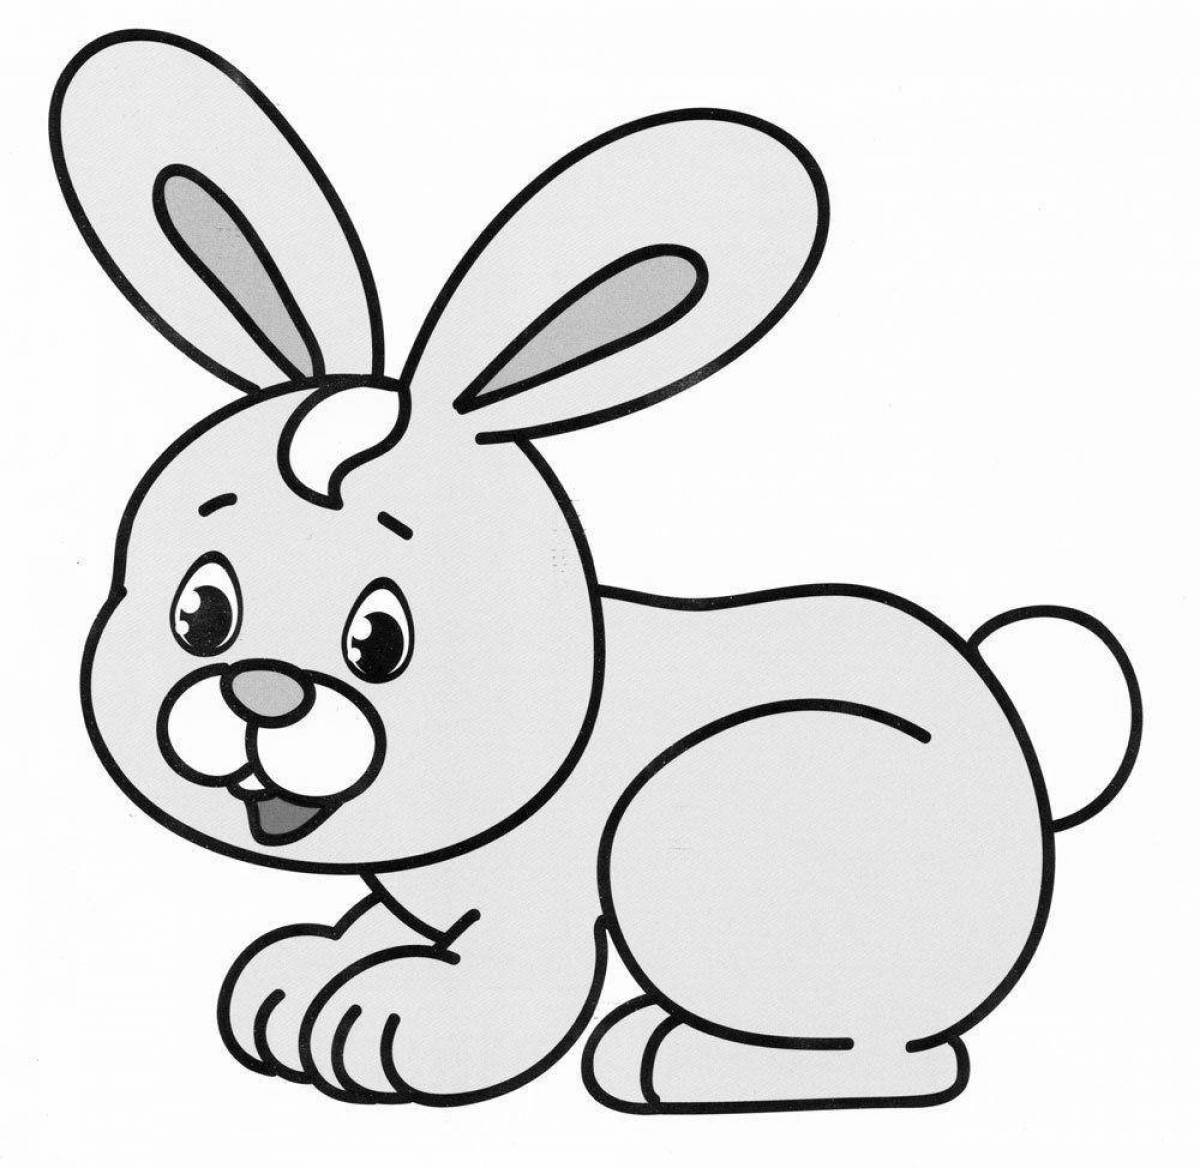 Colorful rabbit coloring book